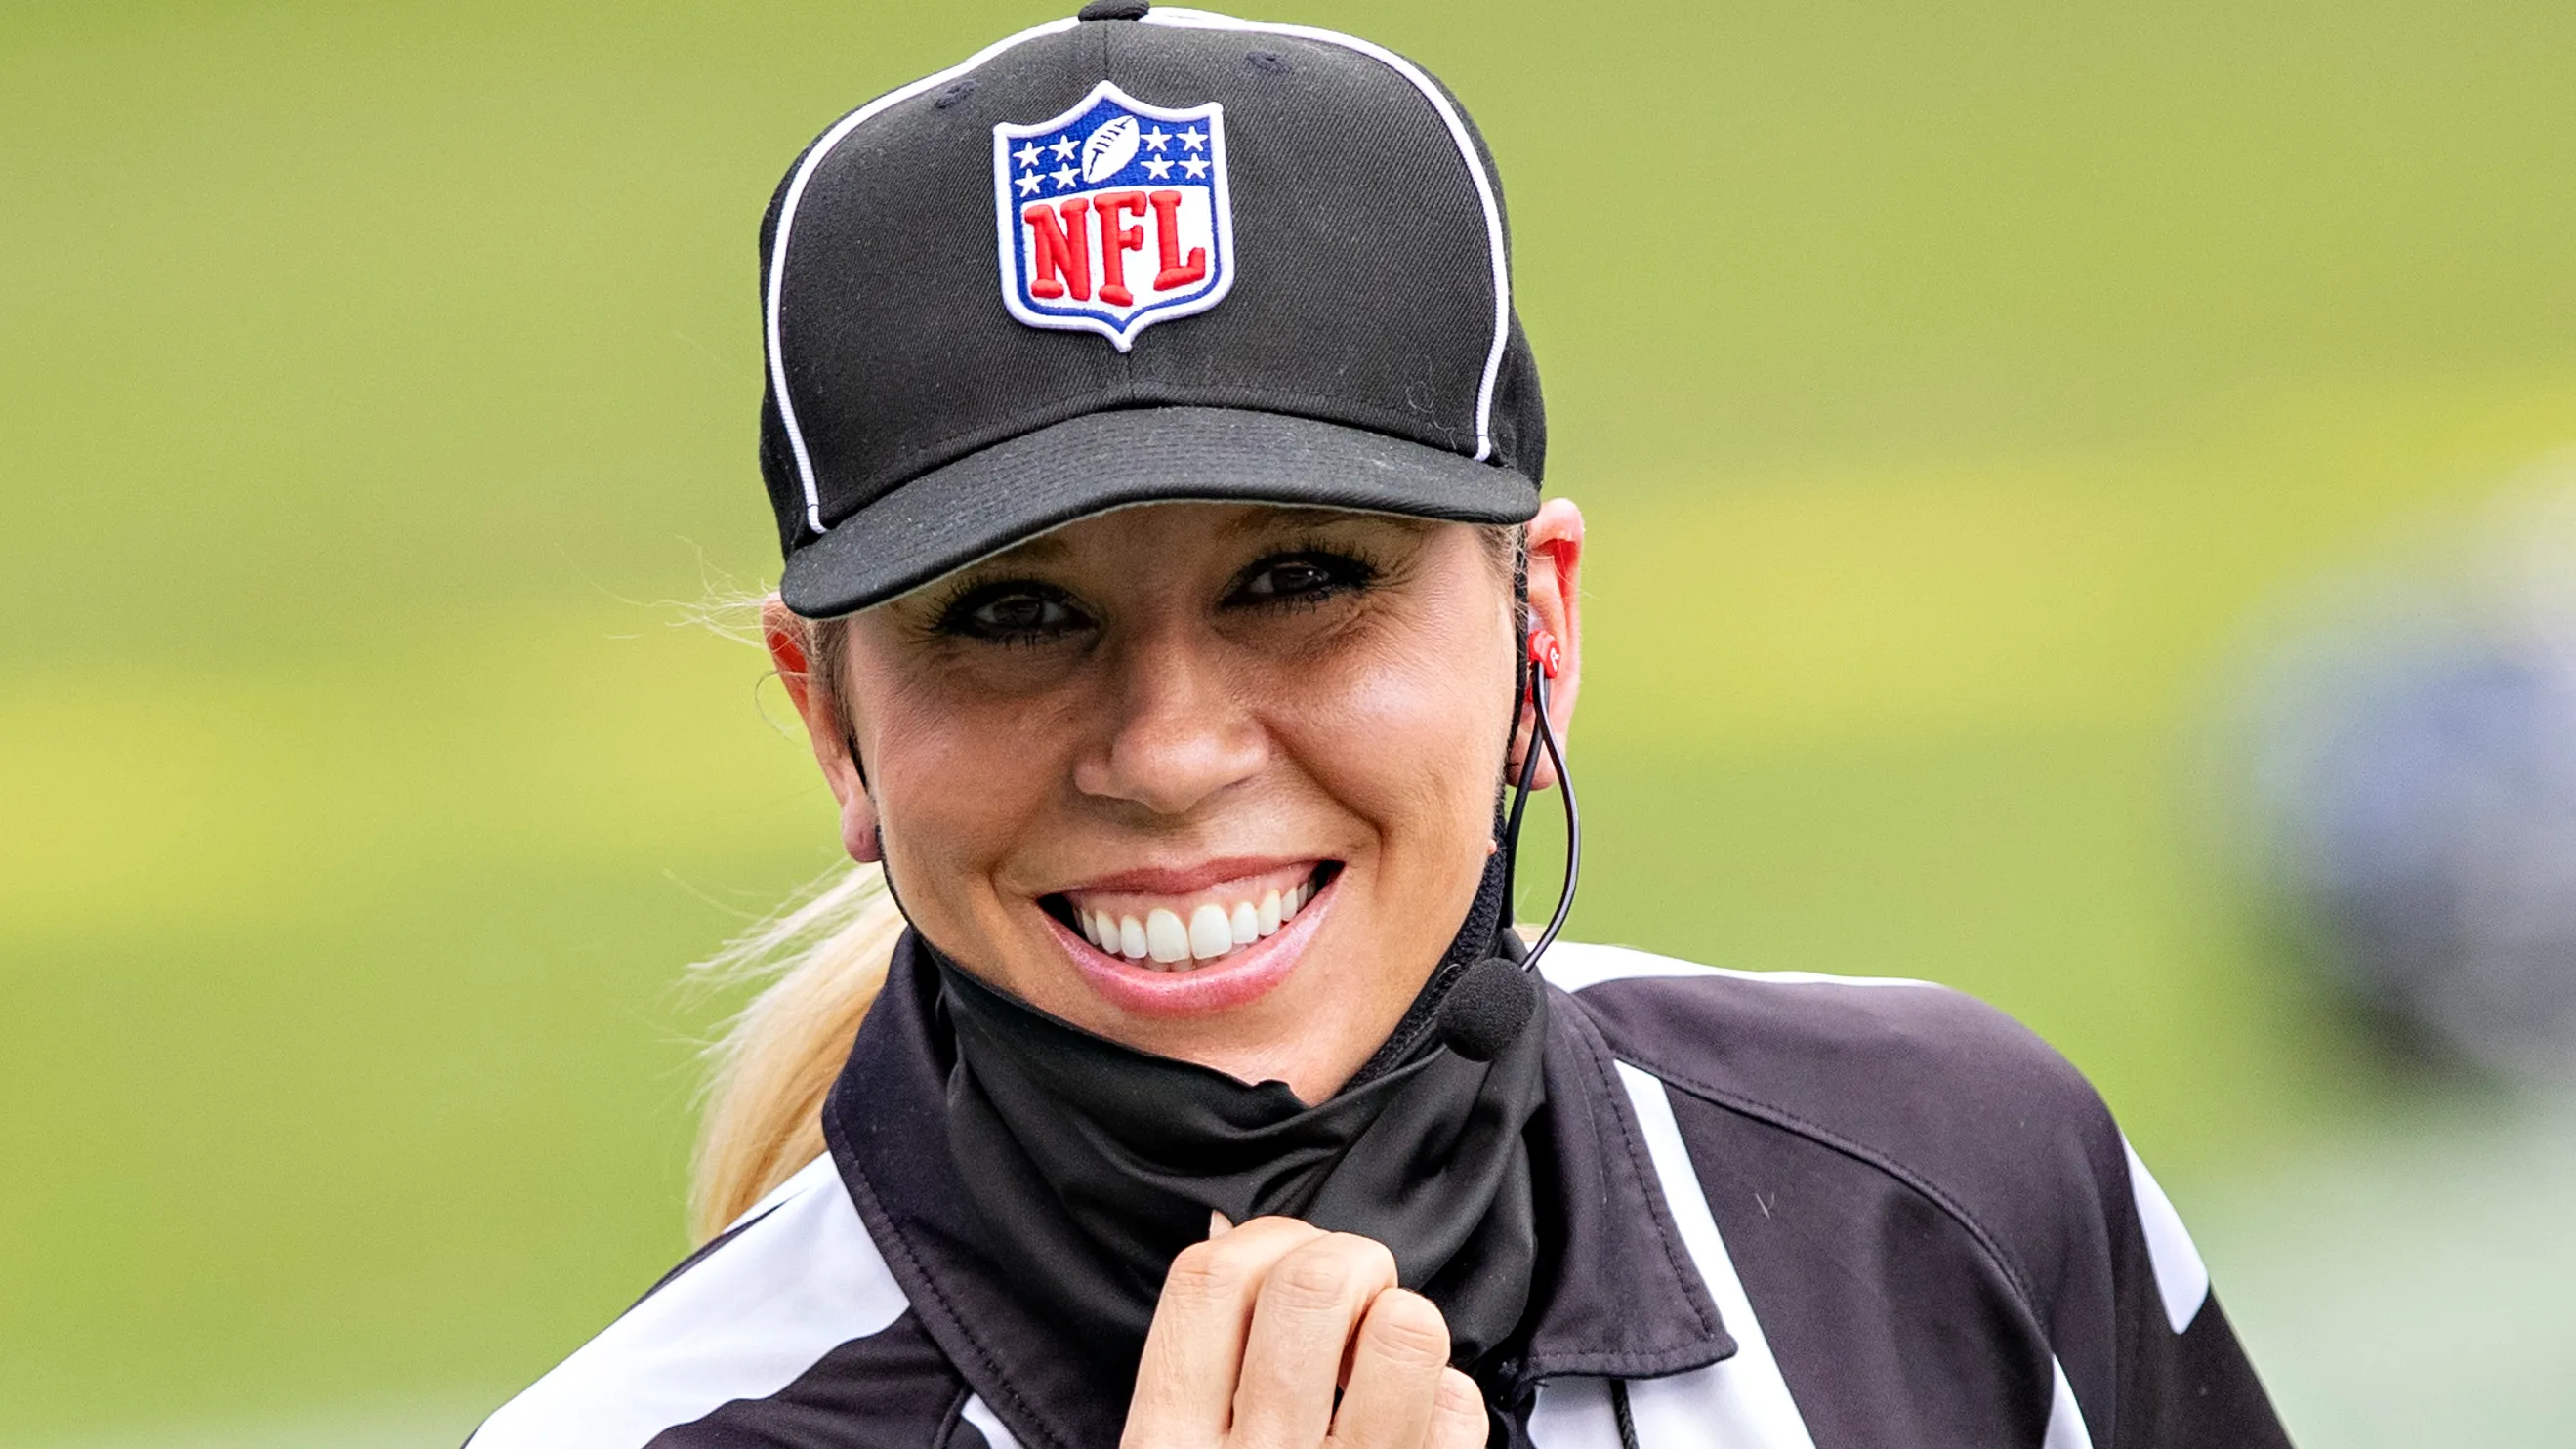 Sarah Thomas to become first woman to officiate at Super Bowl